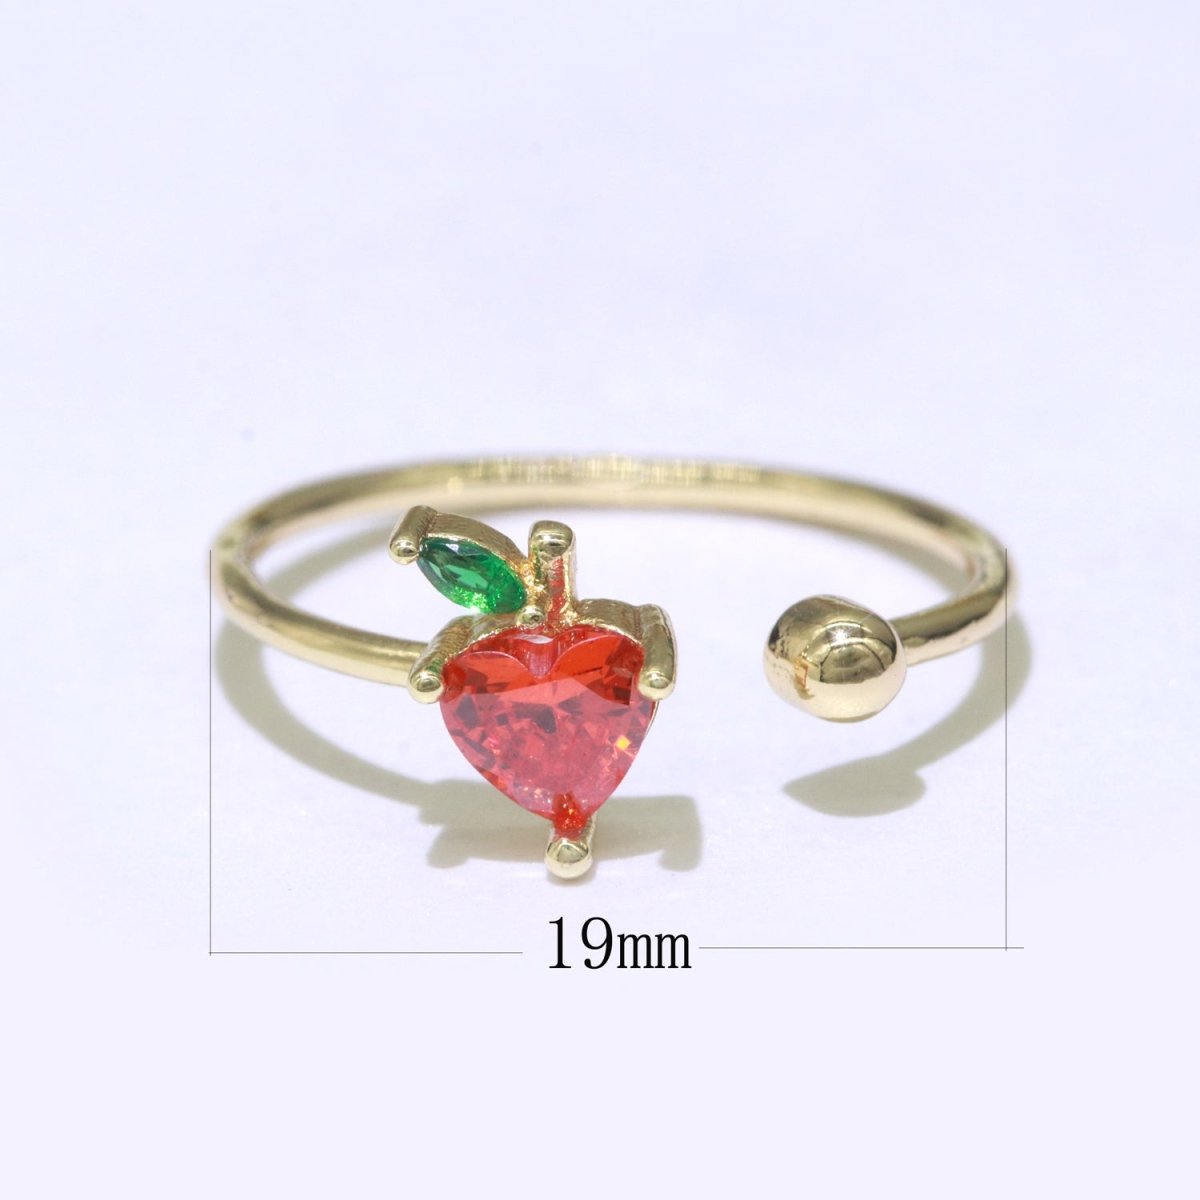 Dainty Strawberry ring, Gold Mini Fruit Ring, Dainty Stackable Rings, Open Adjustable Ring Crystal Tropical Fruits Ring O-451 - DLUXCA